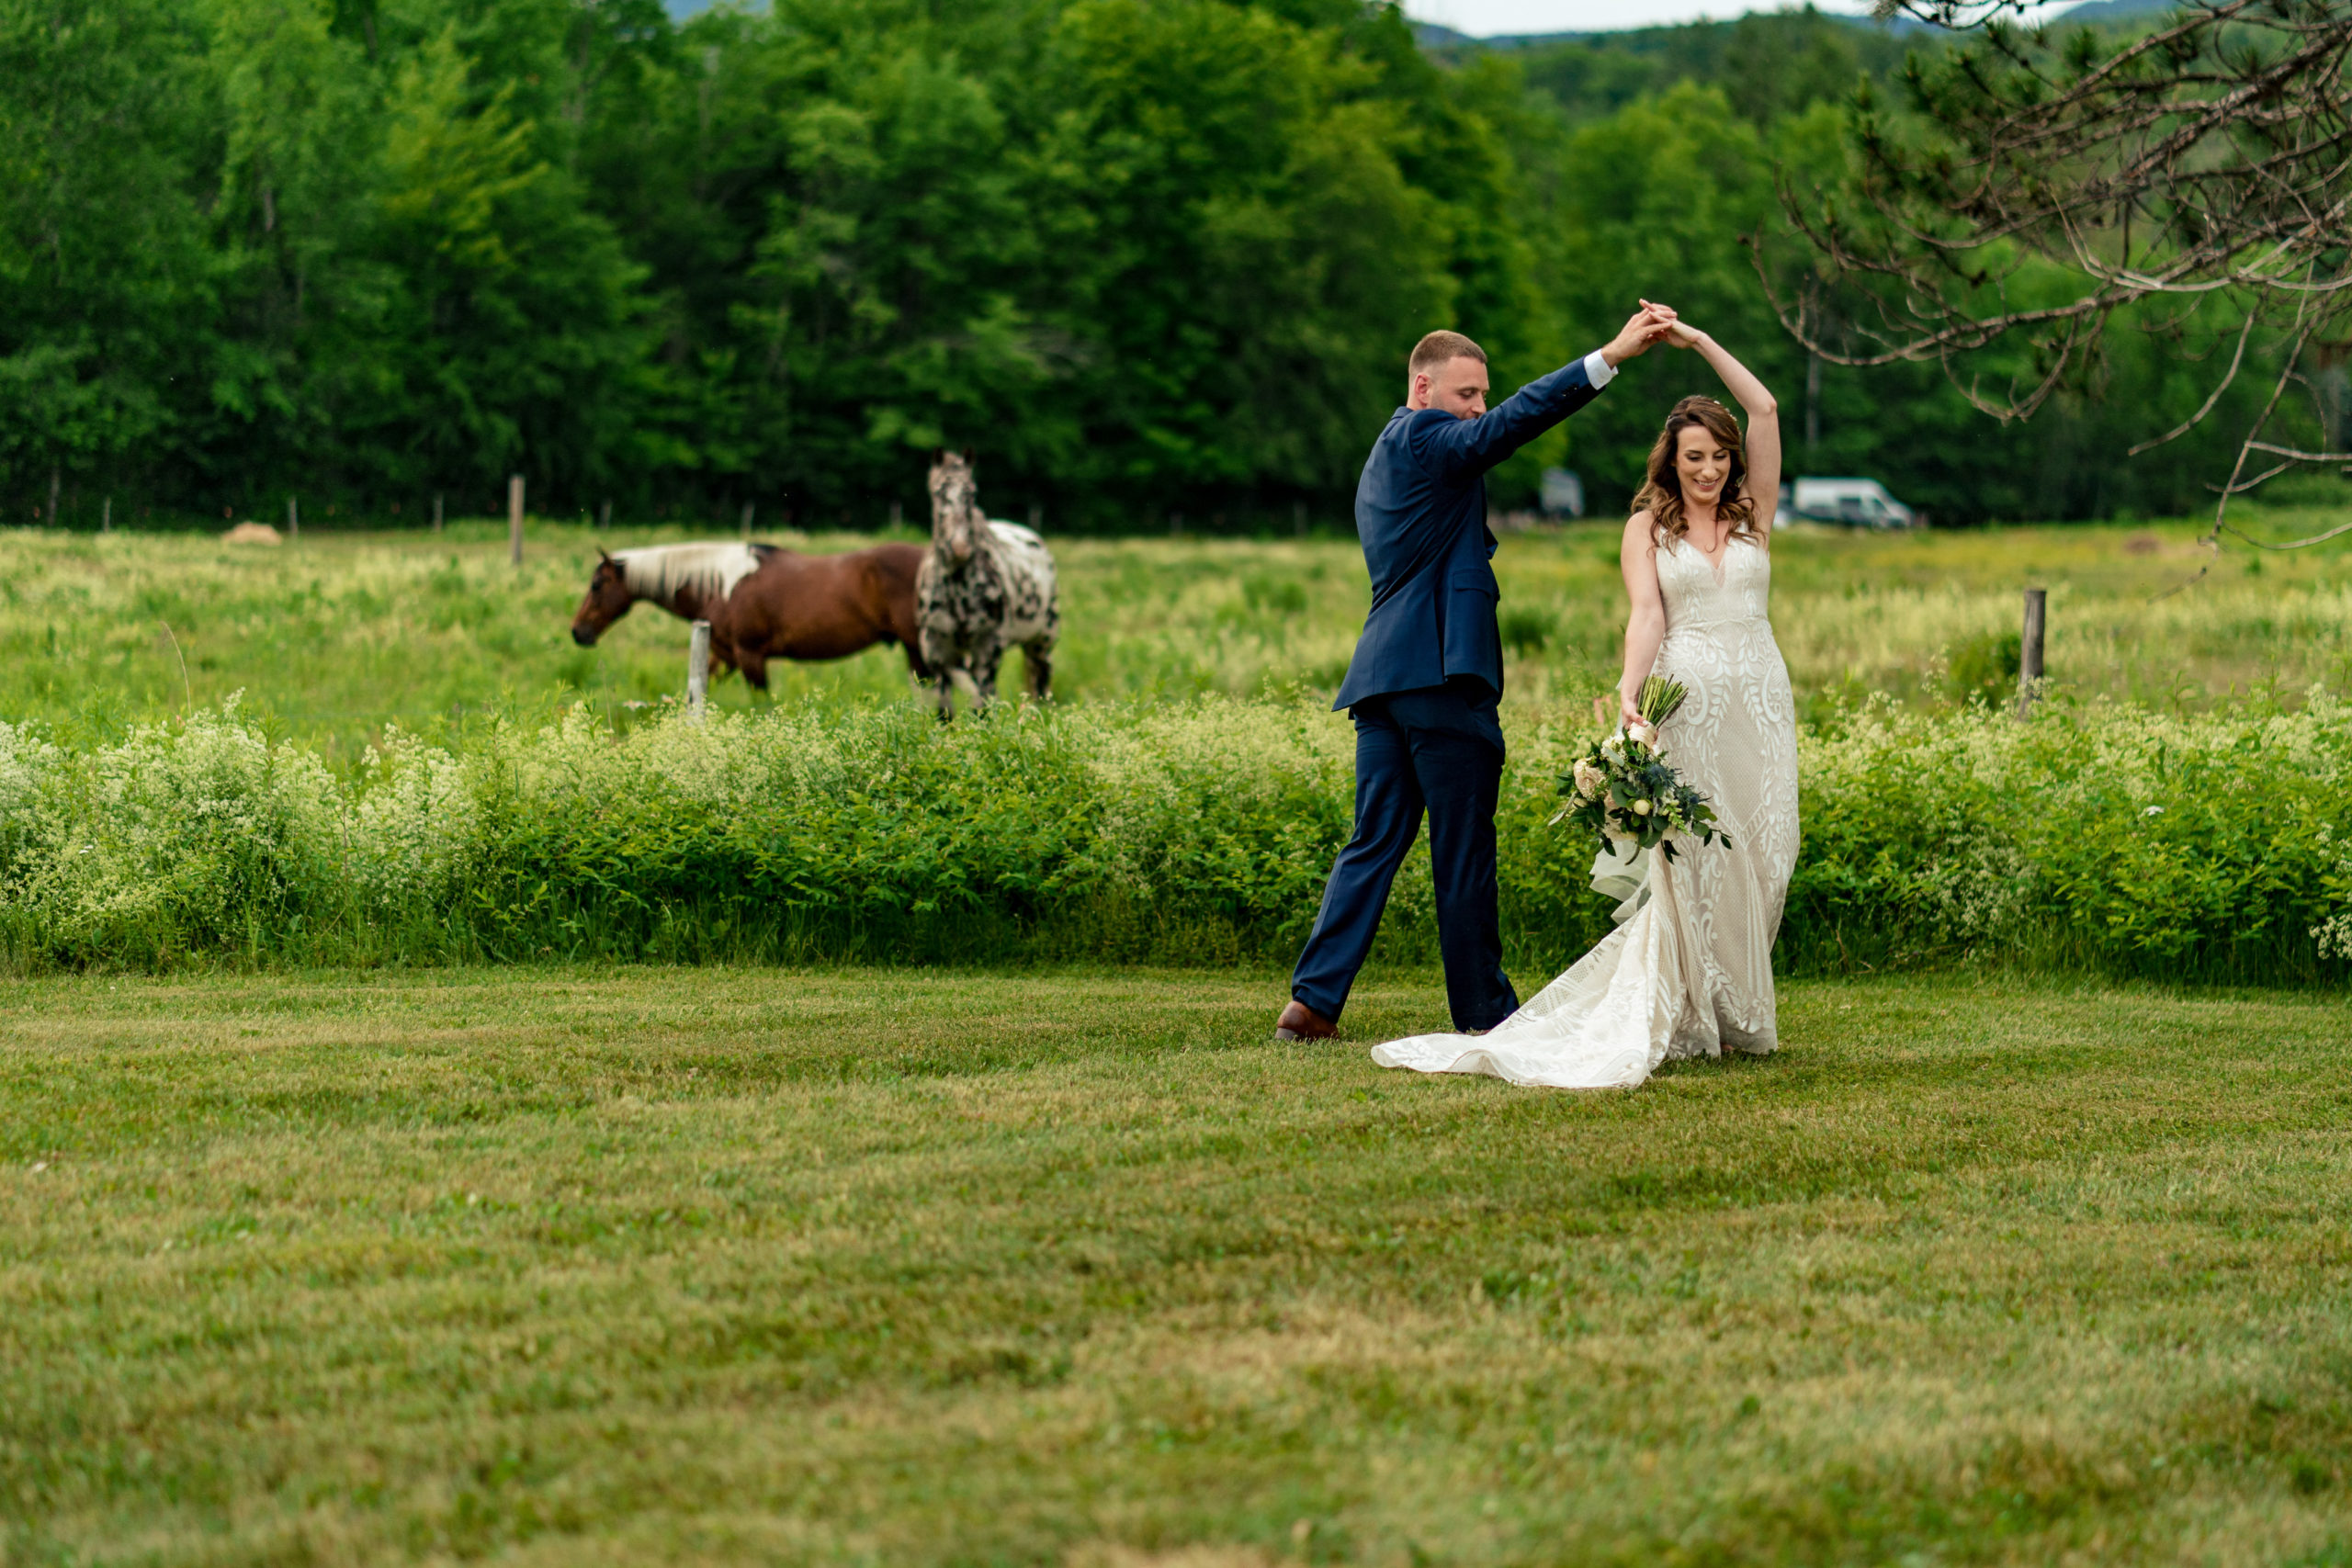 bride and groom dancing in a field with horses